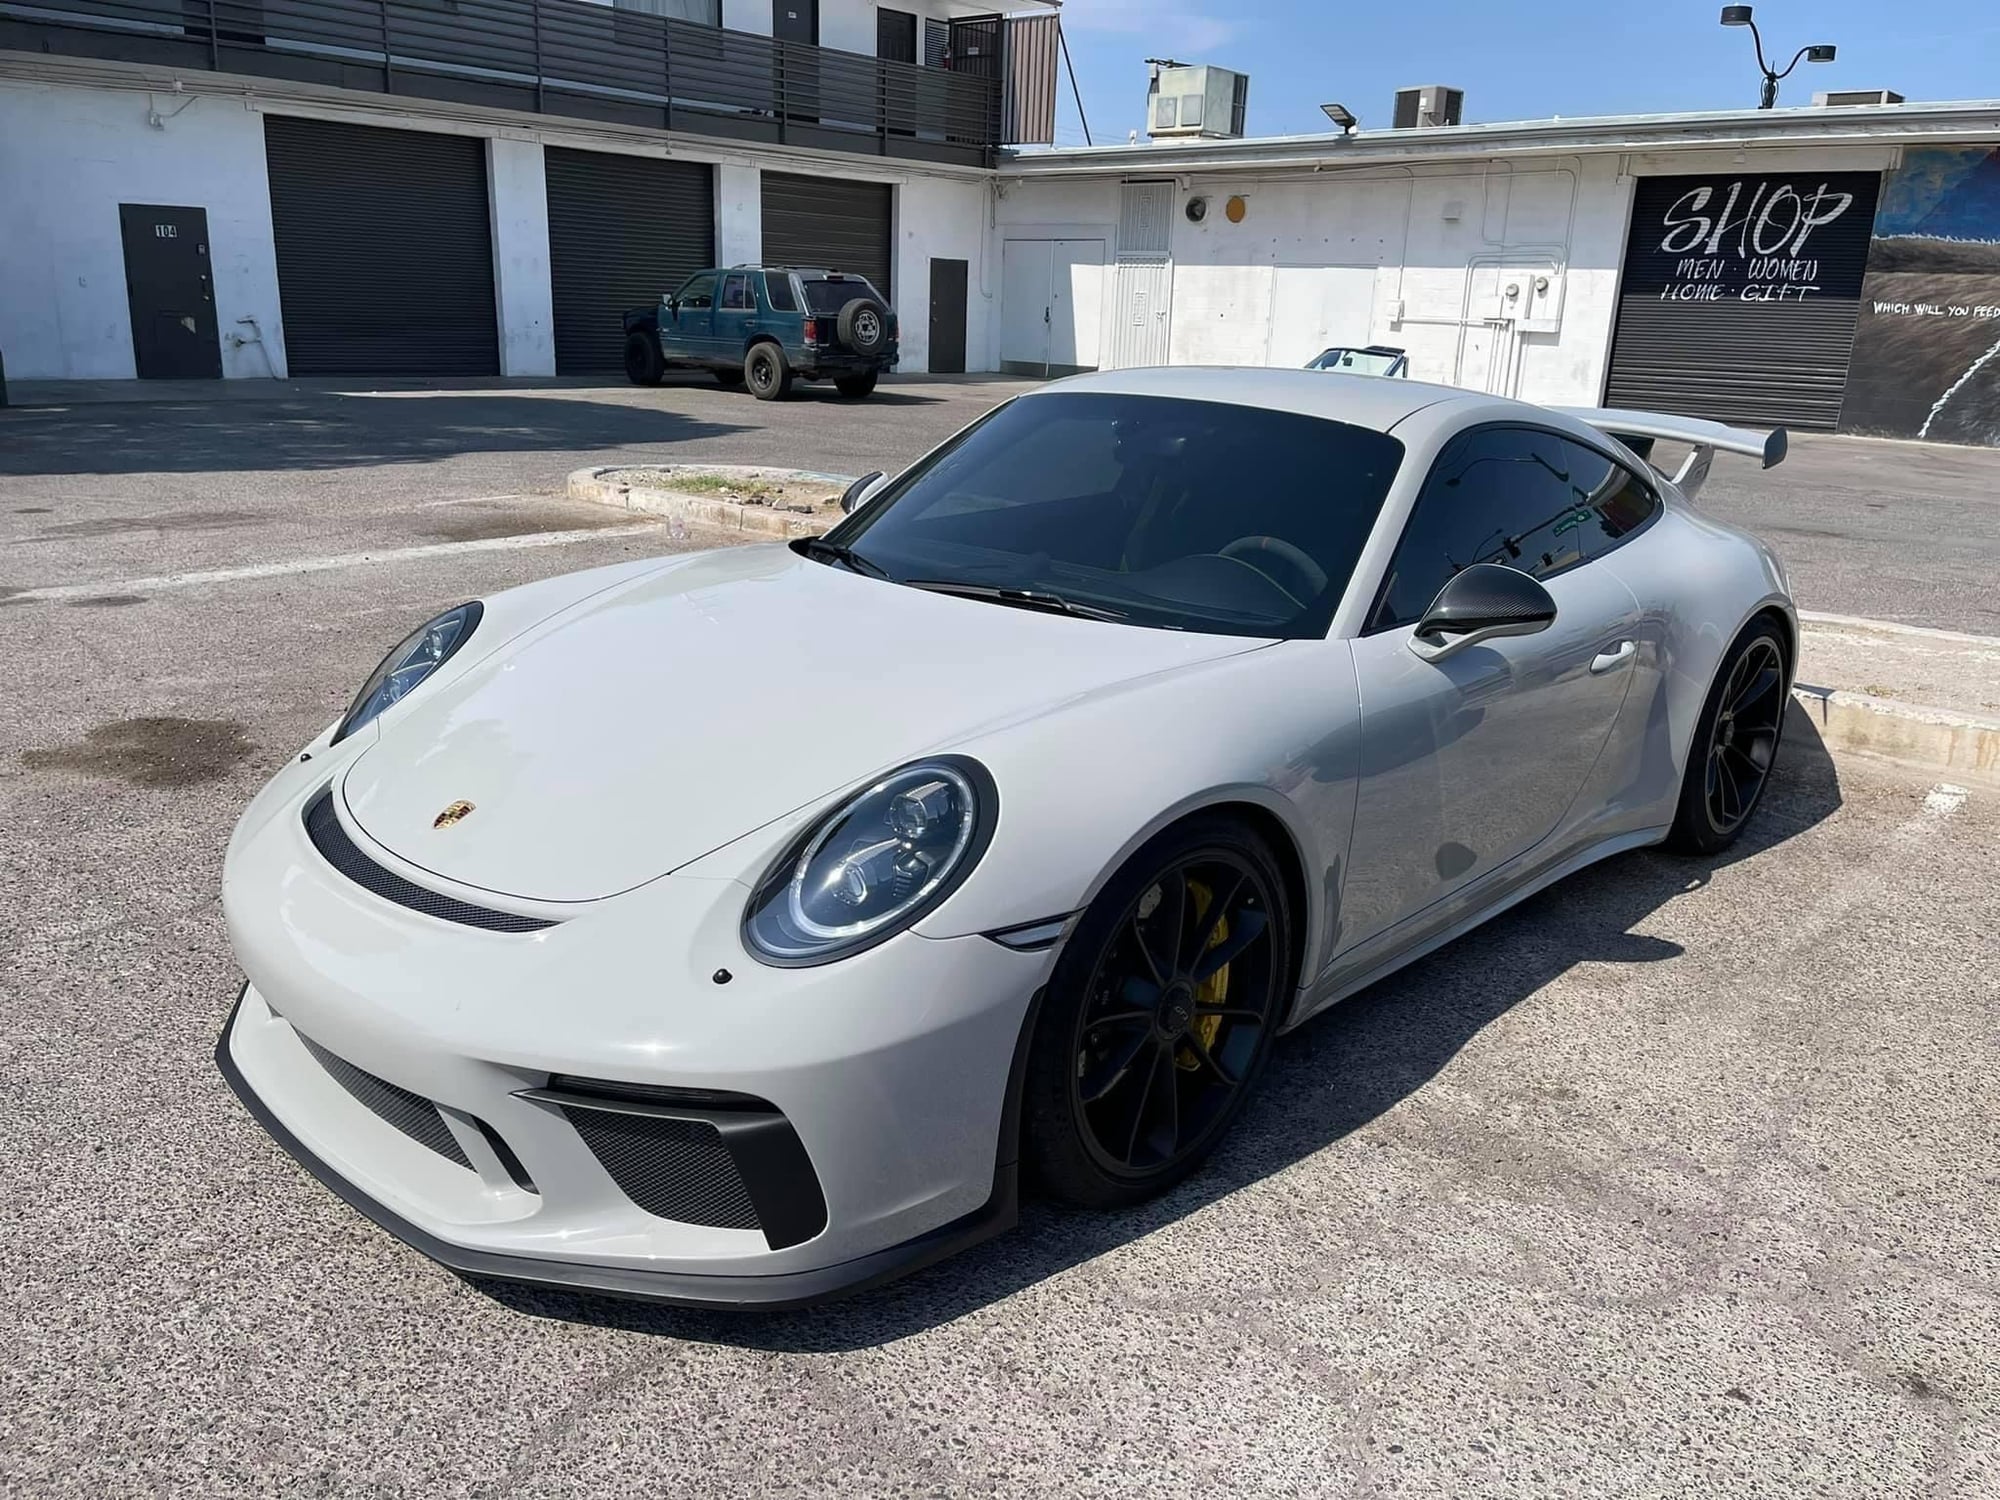 2018 Porsche GT3 - 2018 GT3 Chalk.  Loaded Spec - Used - VIN WP0AC2A91JS175061 - 10,200 Miles - 6 cyl - 2WD - Automatic - Coupe - Gray - Las Vegas, NV 89138, United States